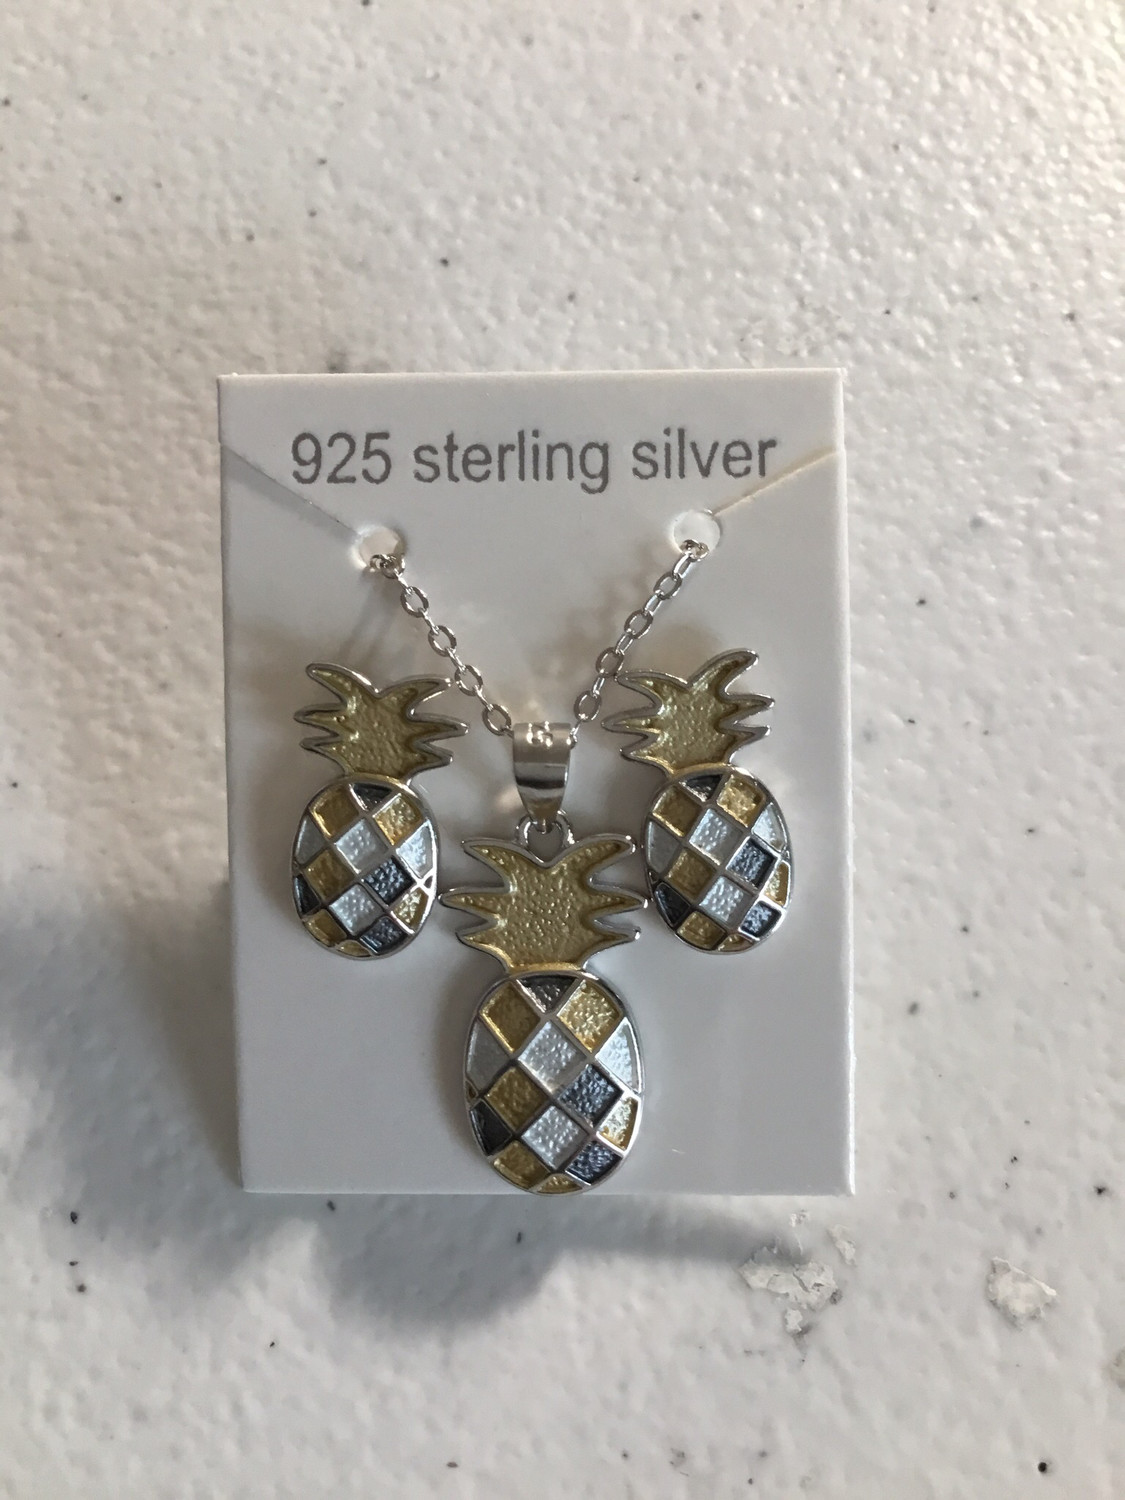 Tri-Color Sterling Silver Pineapple Earrings And Necklace Set 